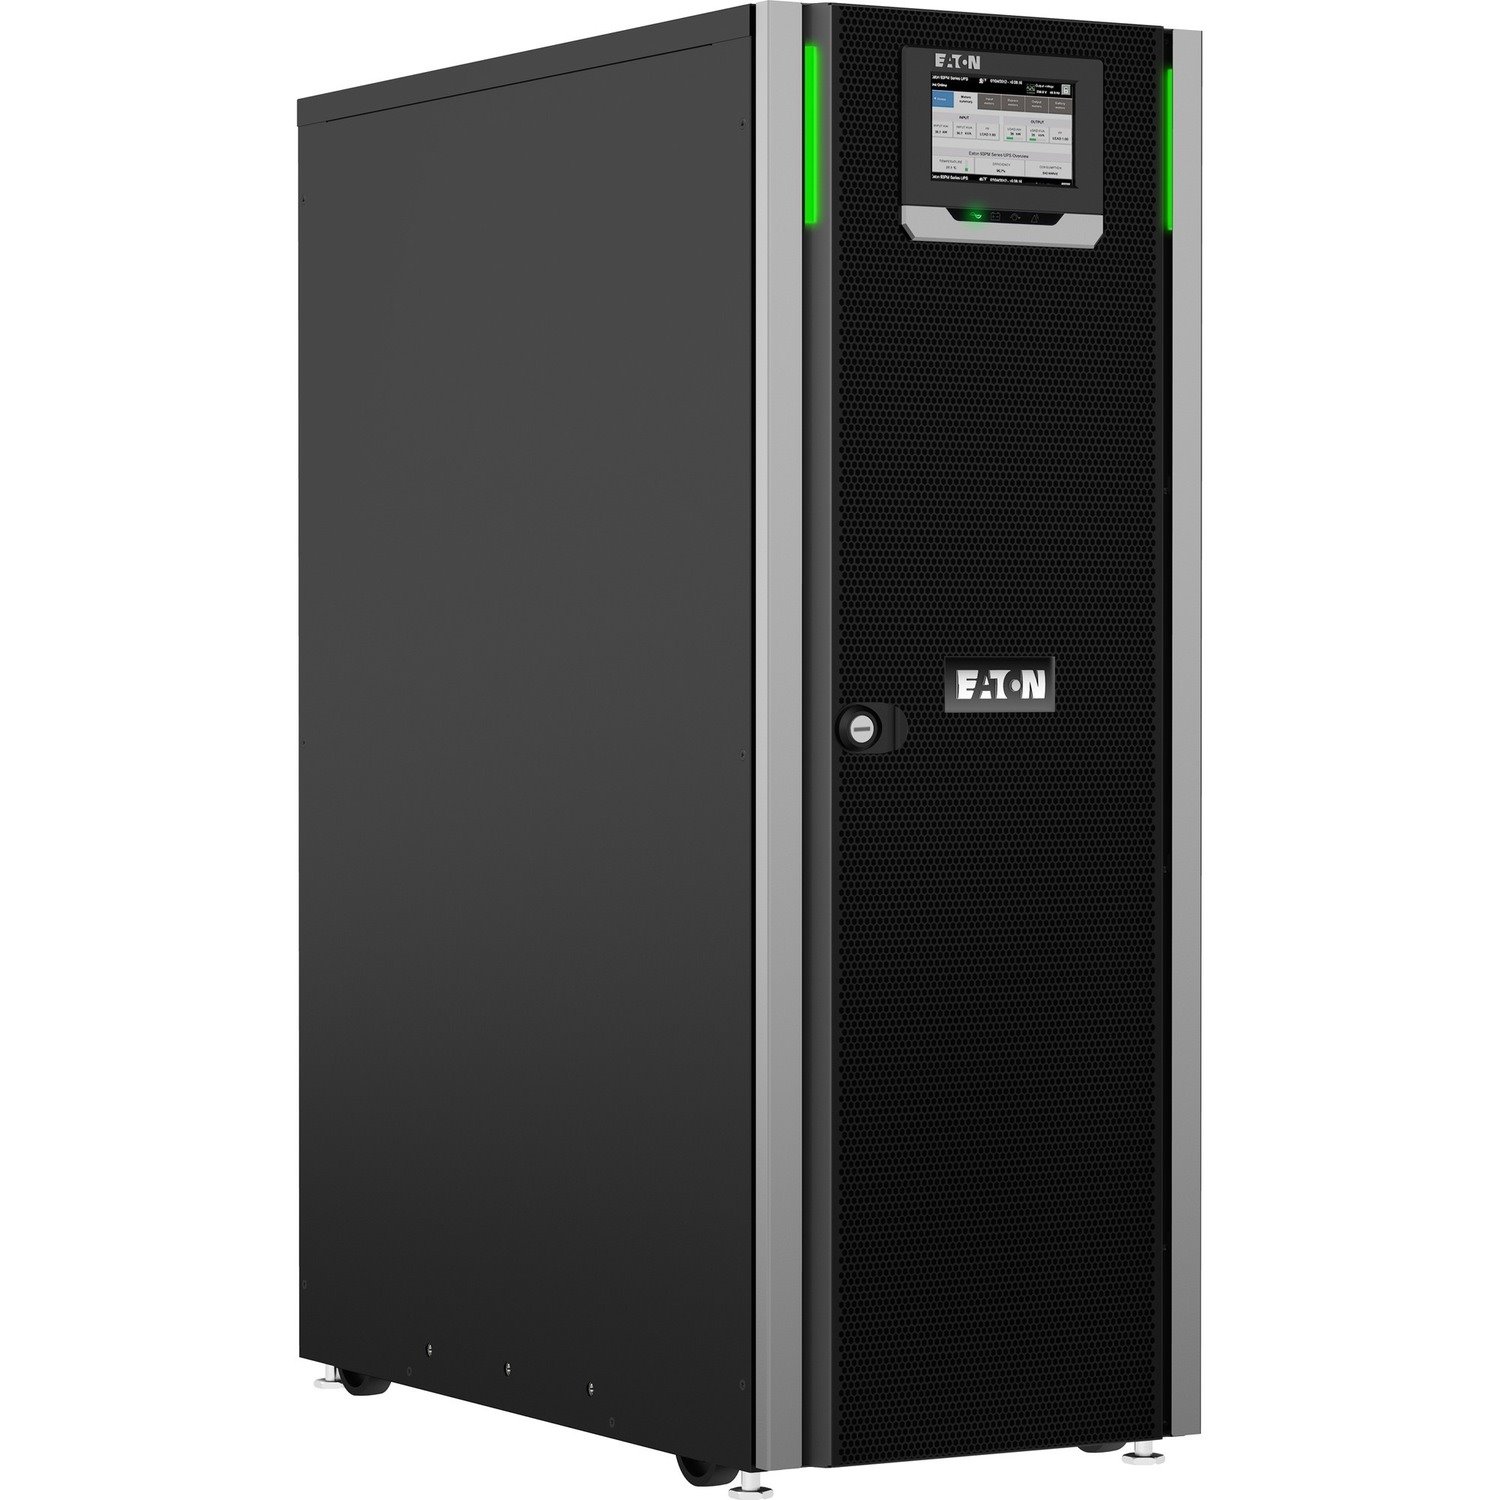 Eaton 93PS 10KVA Tower Double Conversion Online UPS